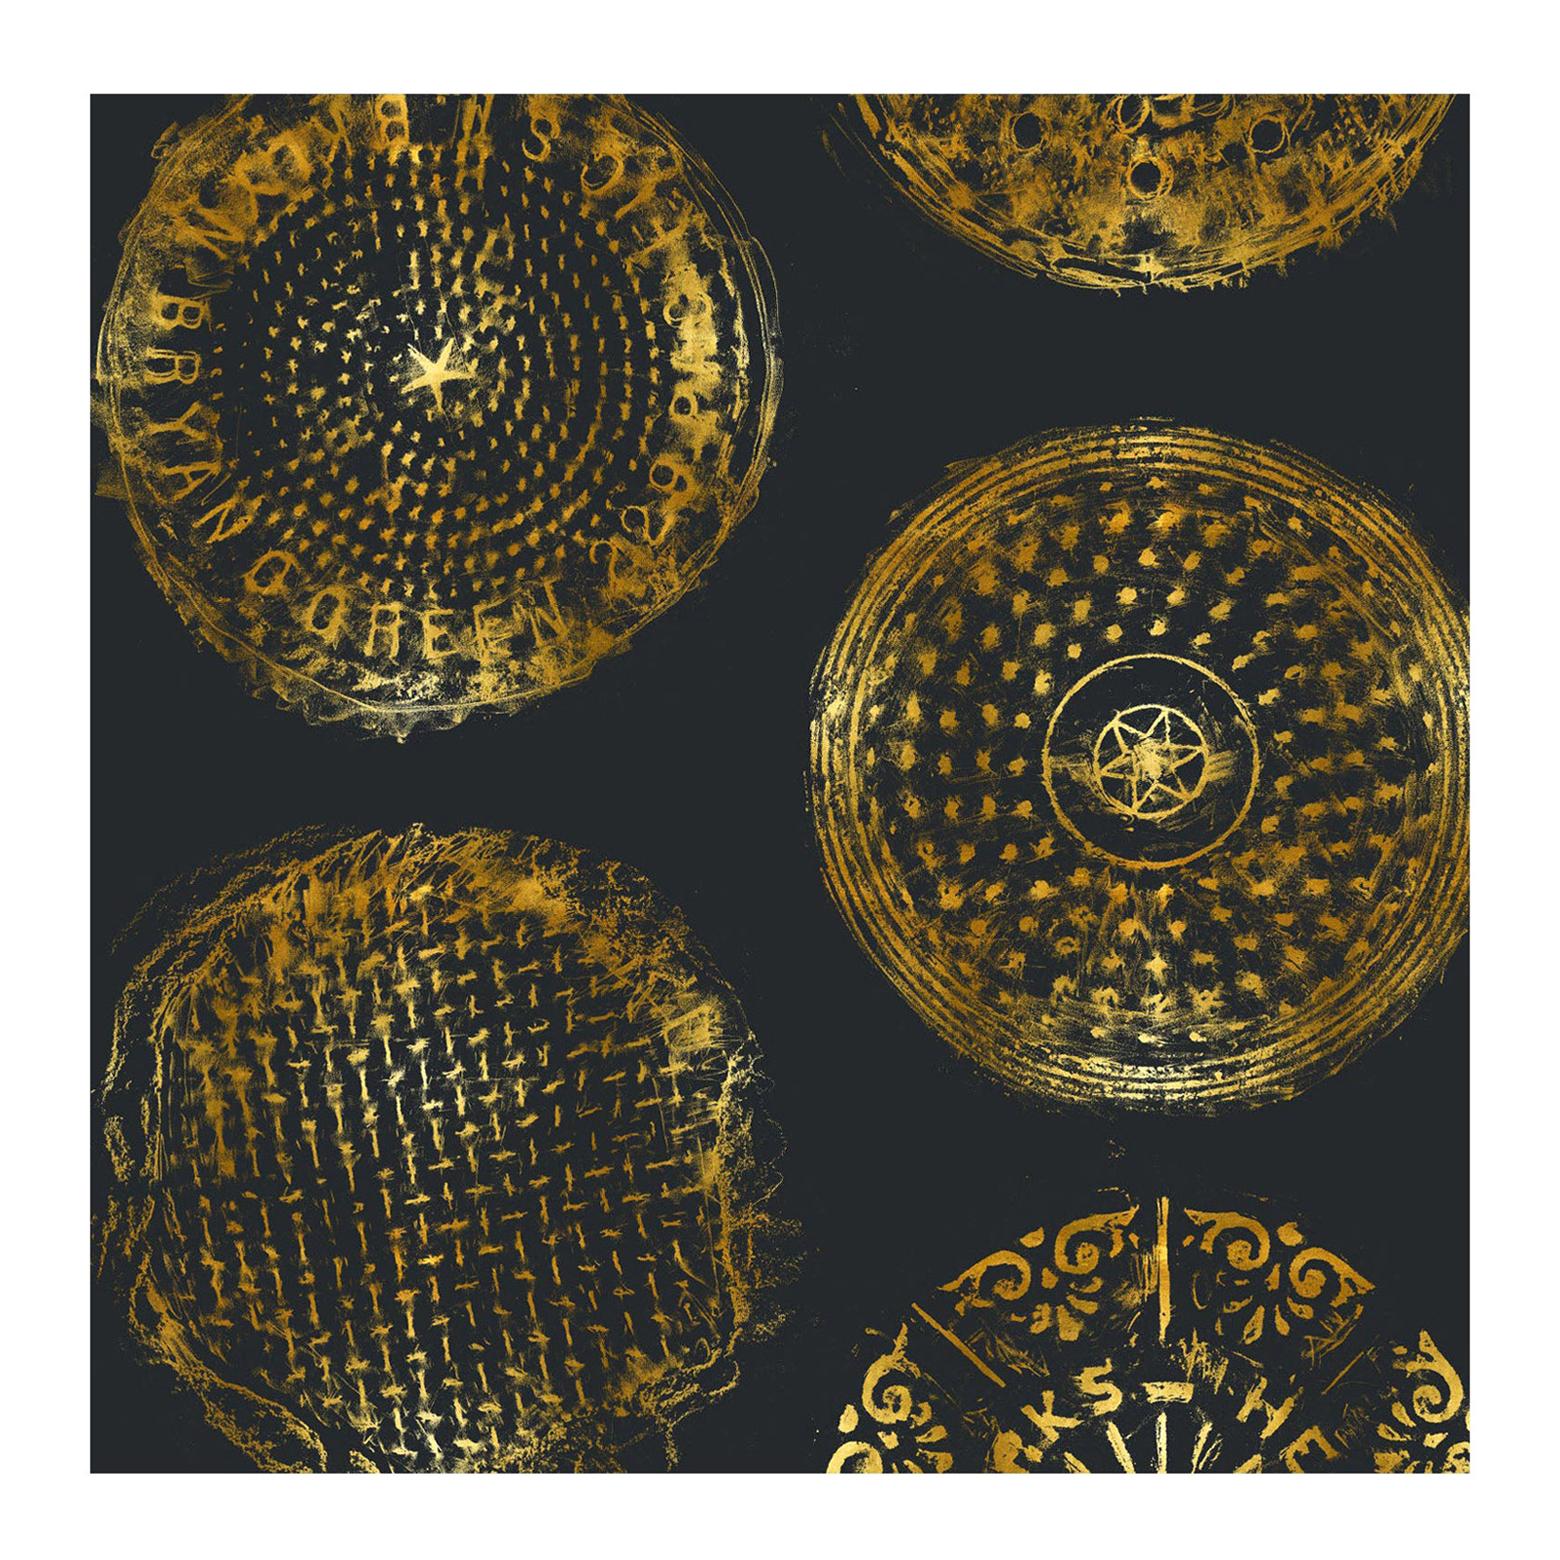 Brooklyn Manhole Printed Wallpaper, Eclipse with Gold Manhole Cover For Sale